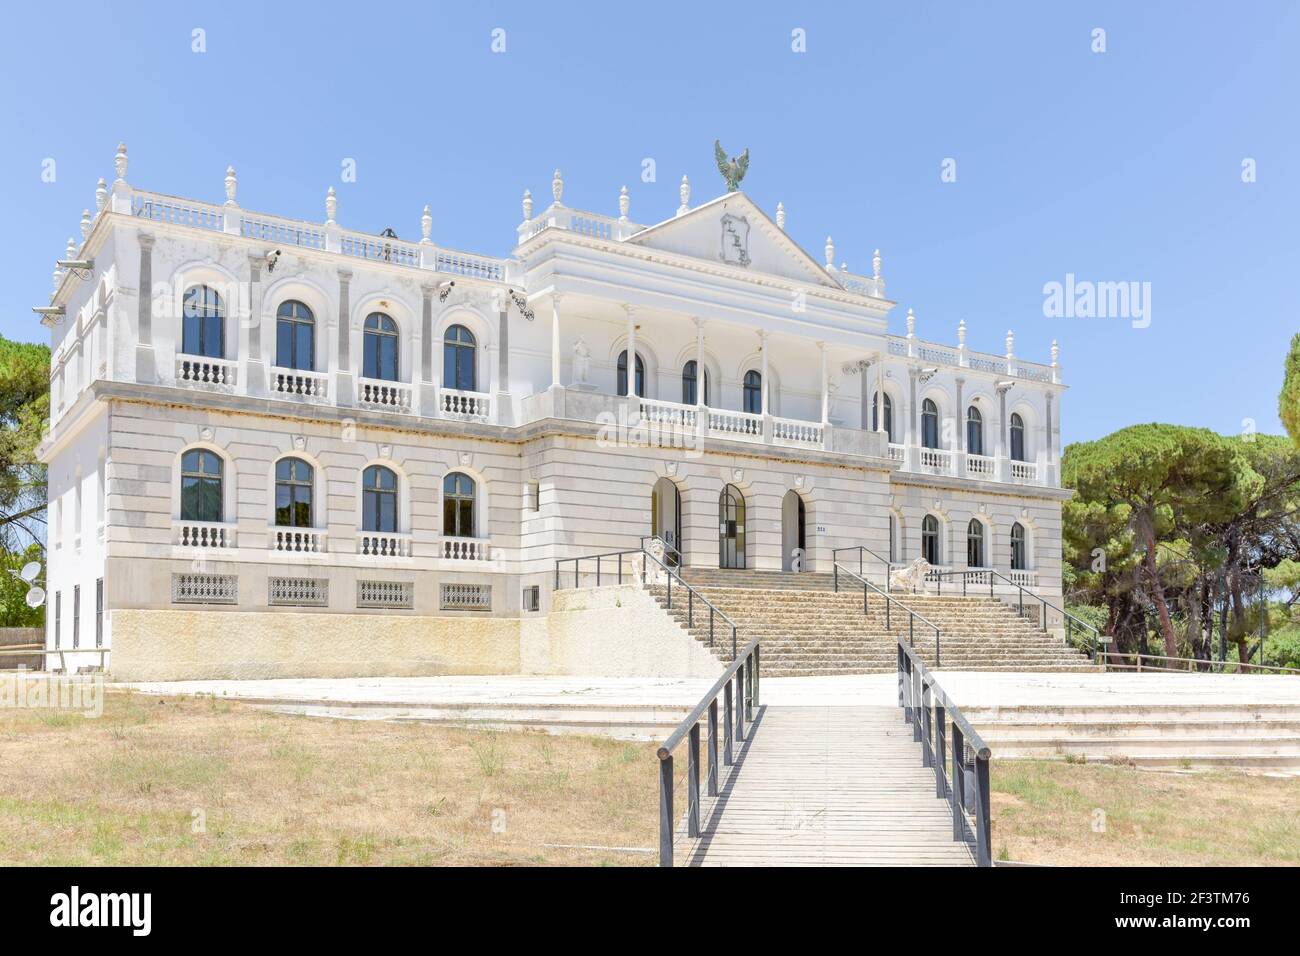 The Acebron Palace in Donana National Park in Huelva, Andalusia, Spain. Stock Photo